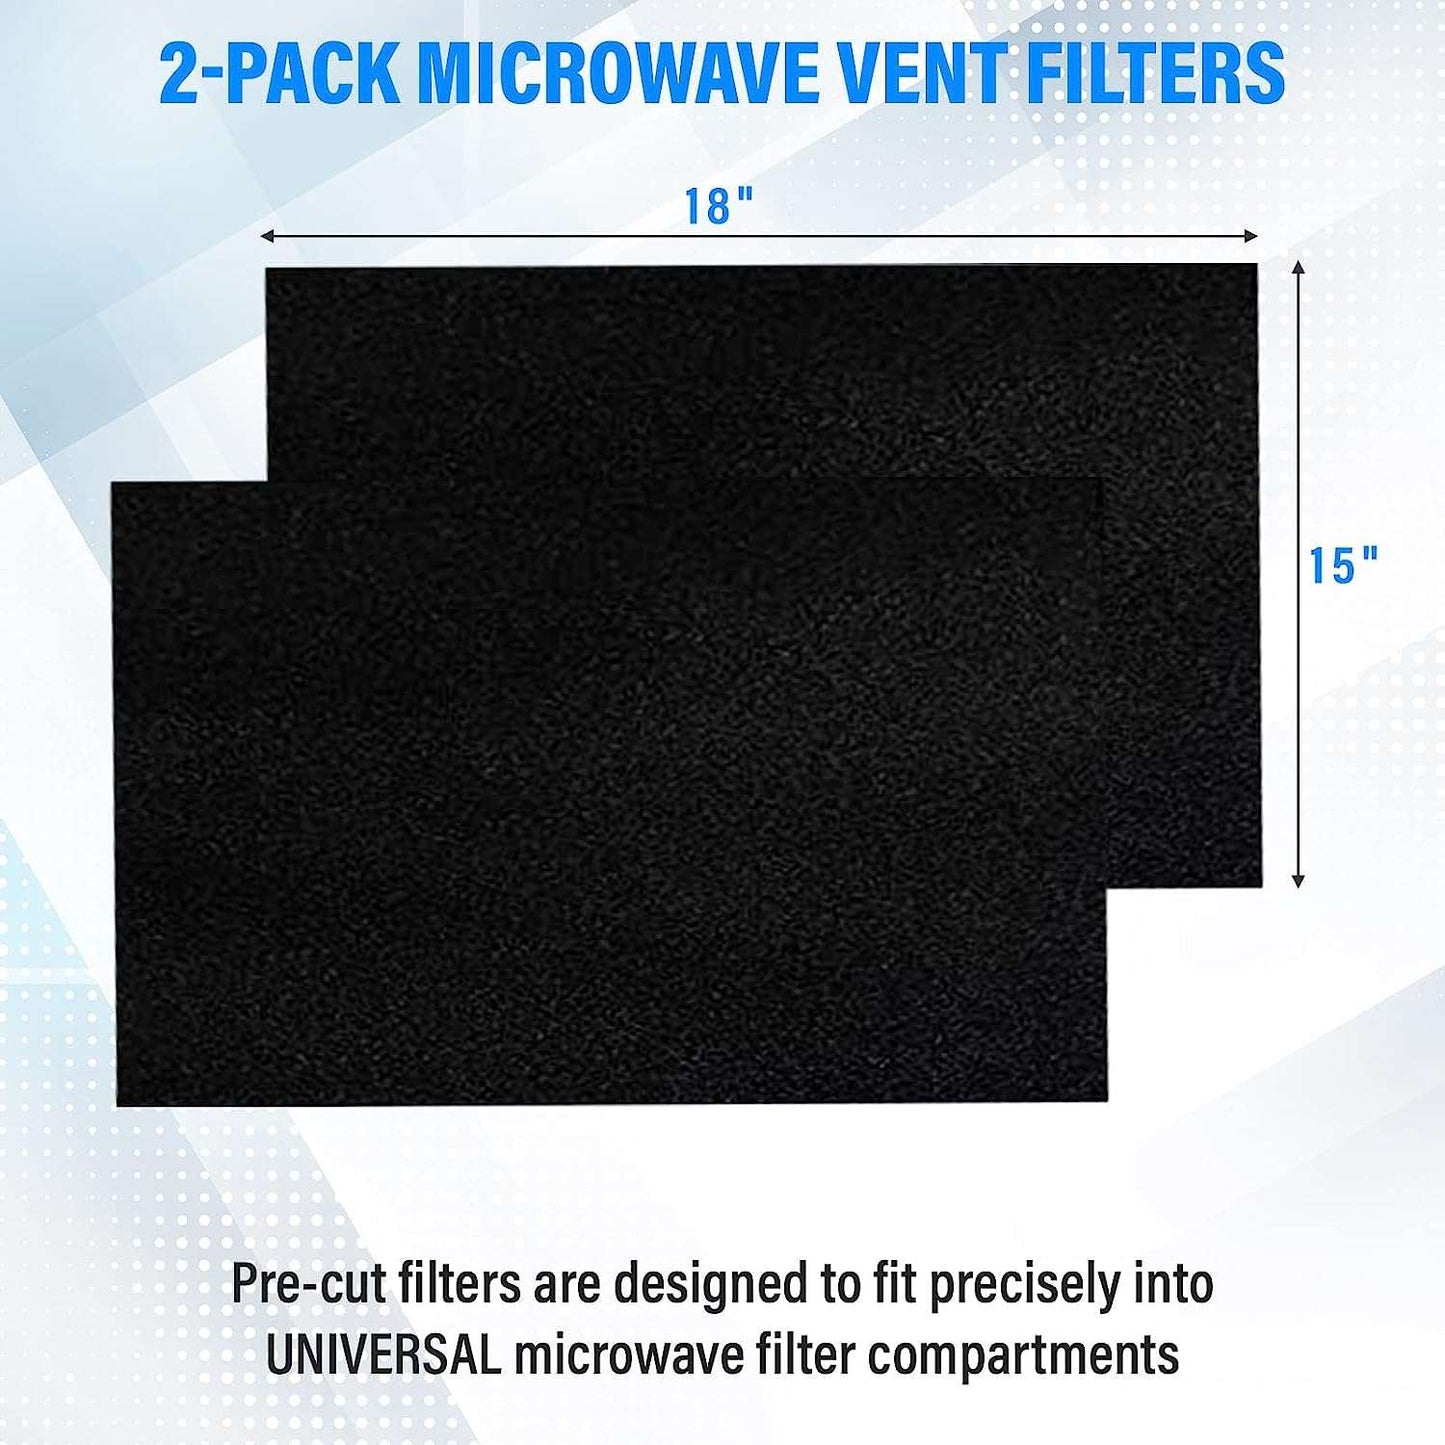 2pk Microwave Charcoal Replacement Filter - Universal Size Cut to Fit OTR Frigidaire Whirlpool GE LG Maytag KitchenAid Appliances